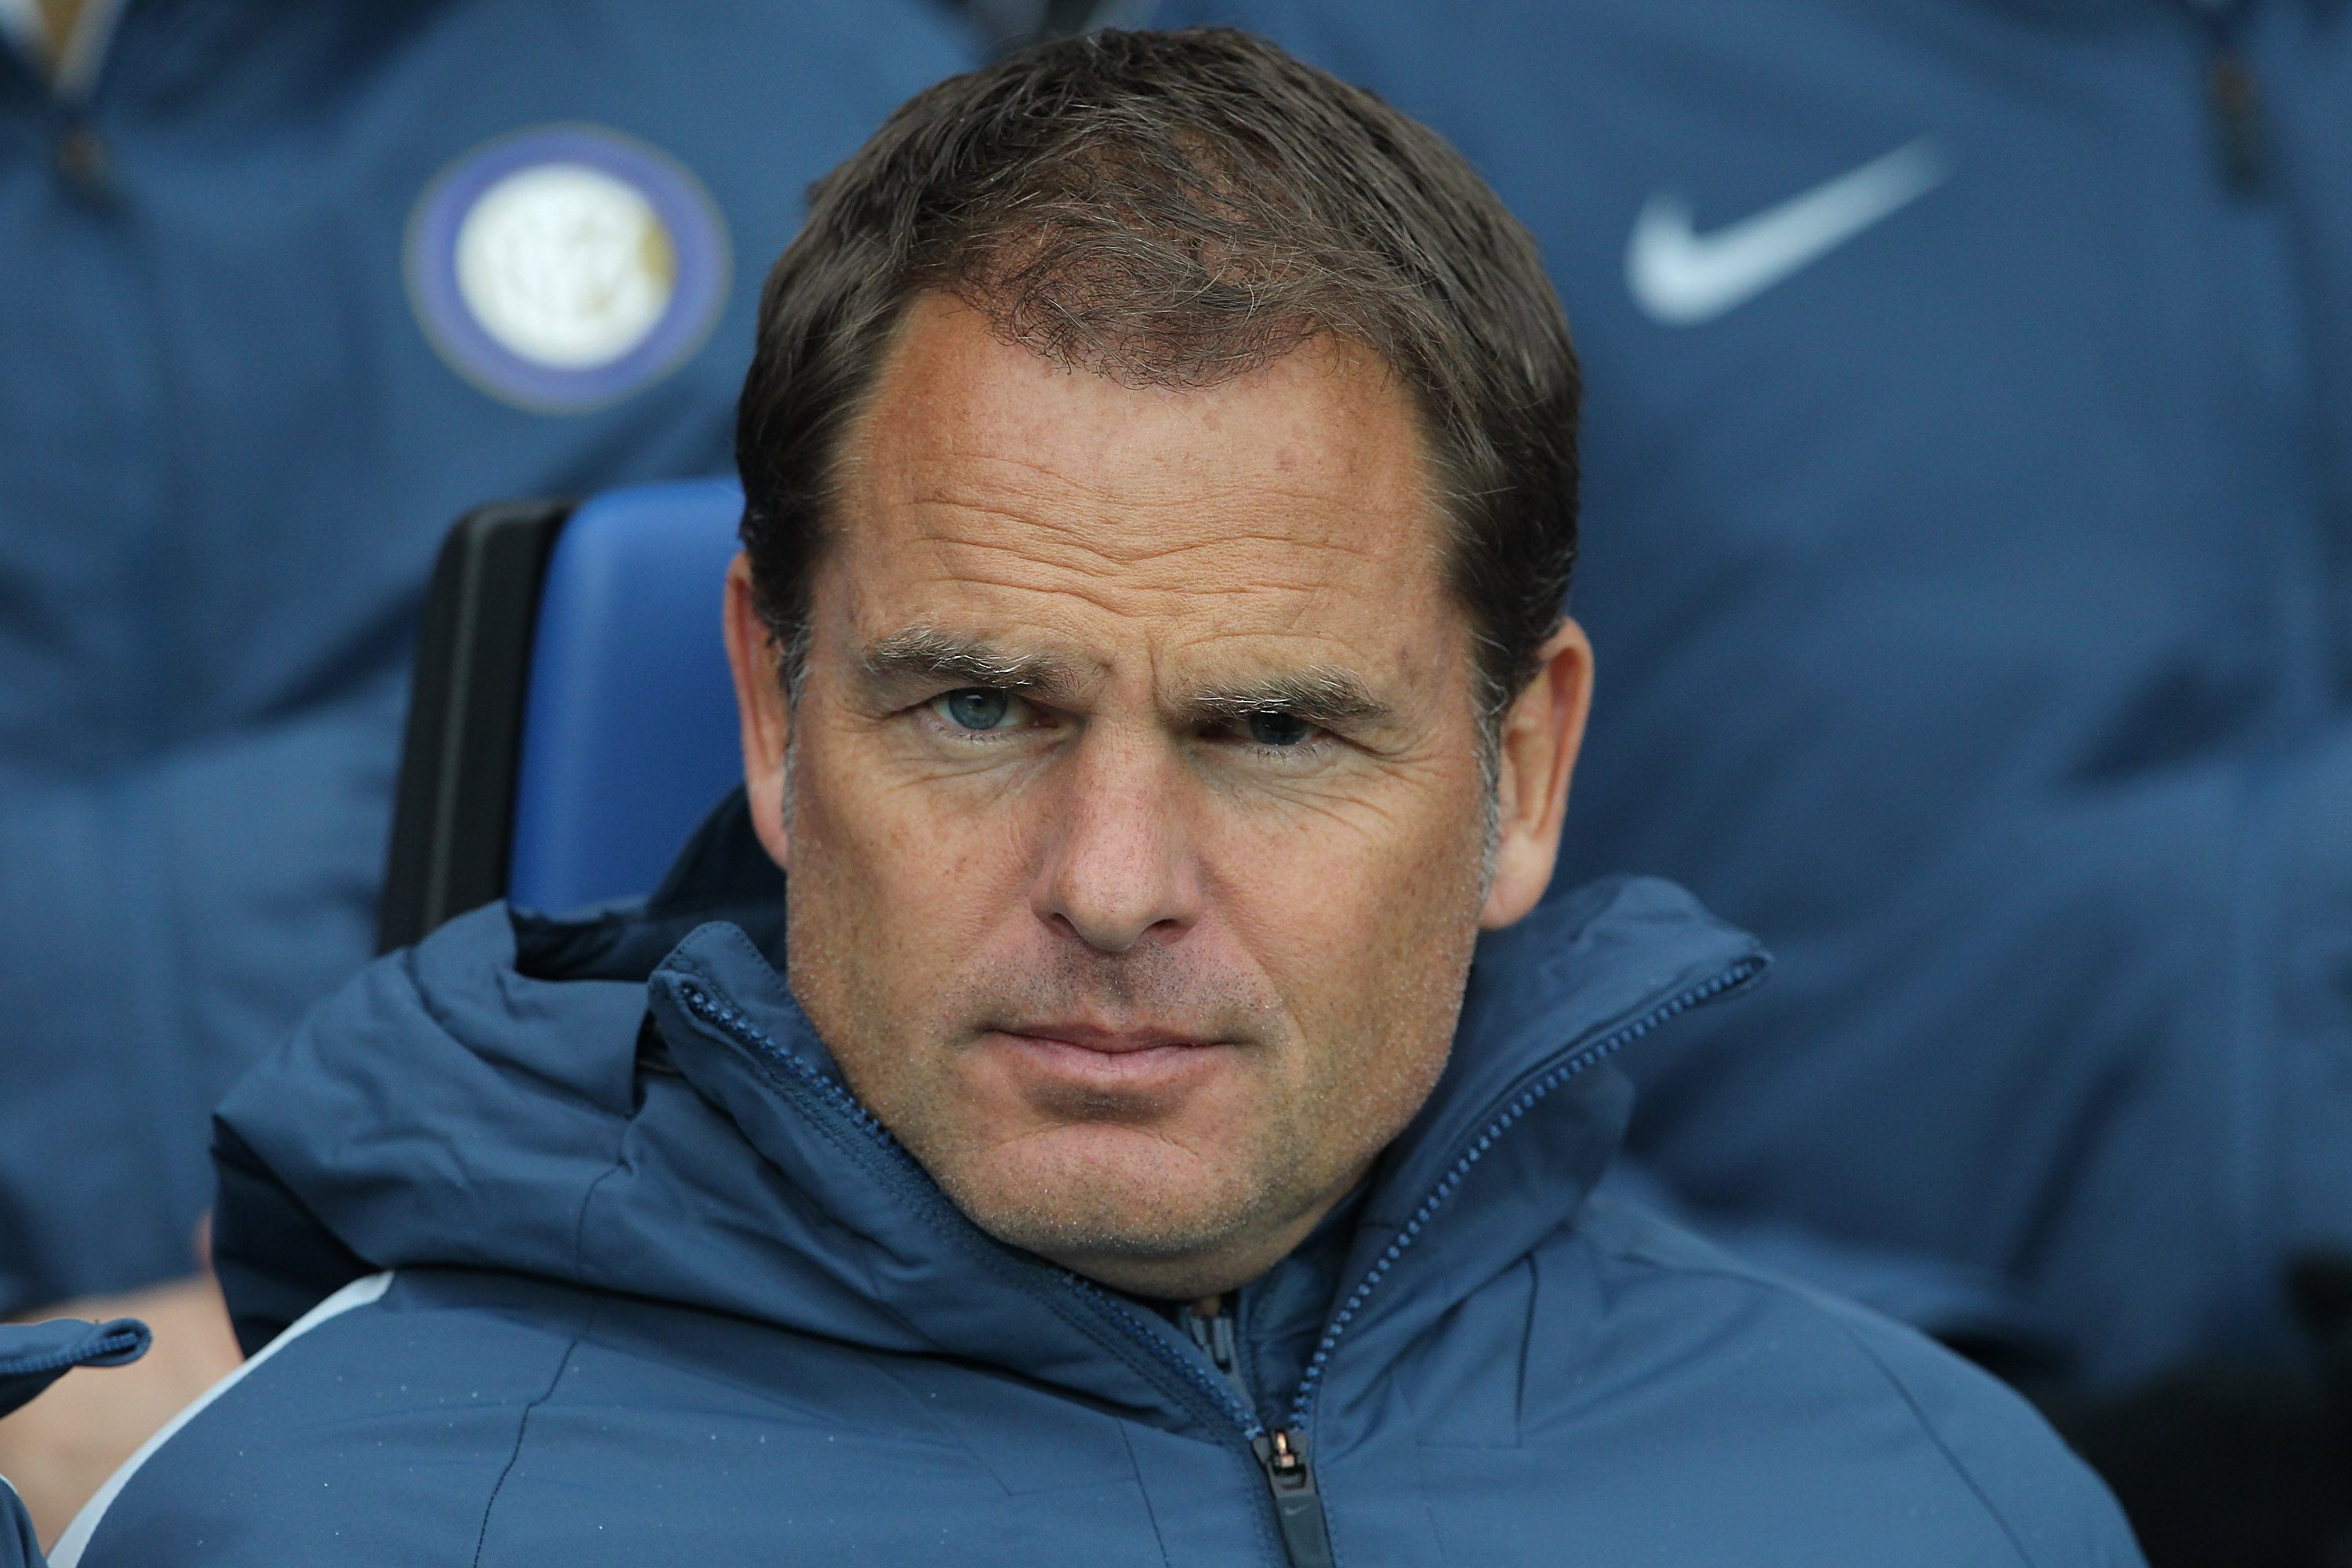 De Boer to Sky: “I always want to see this attitude. The future…”